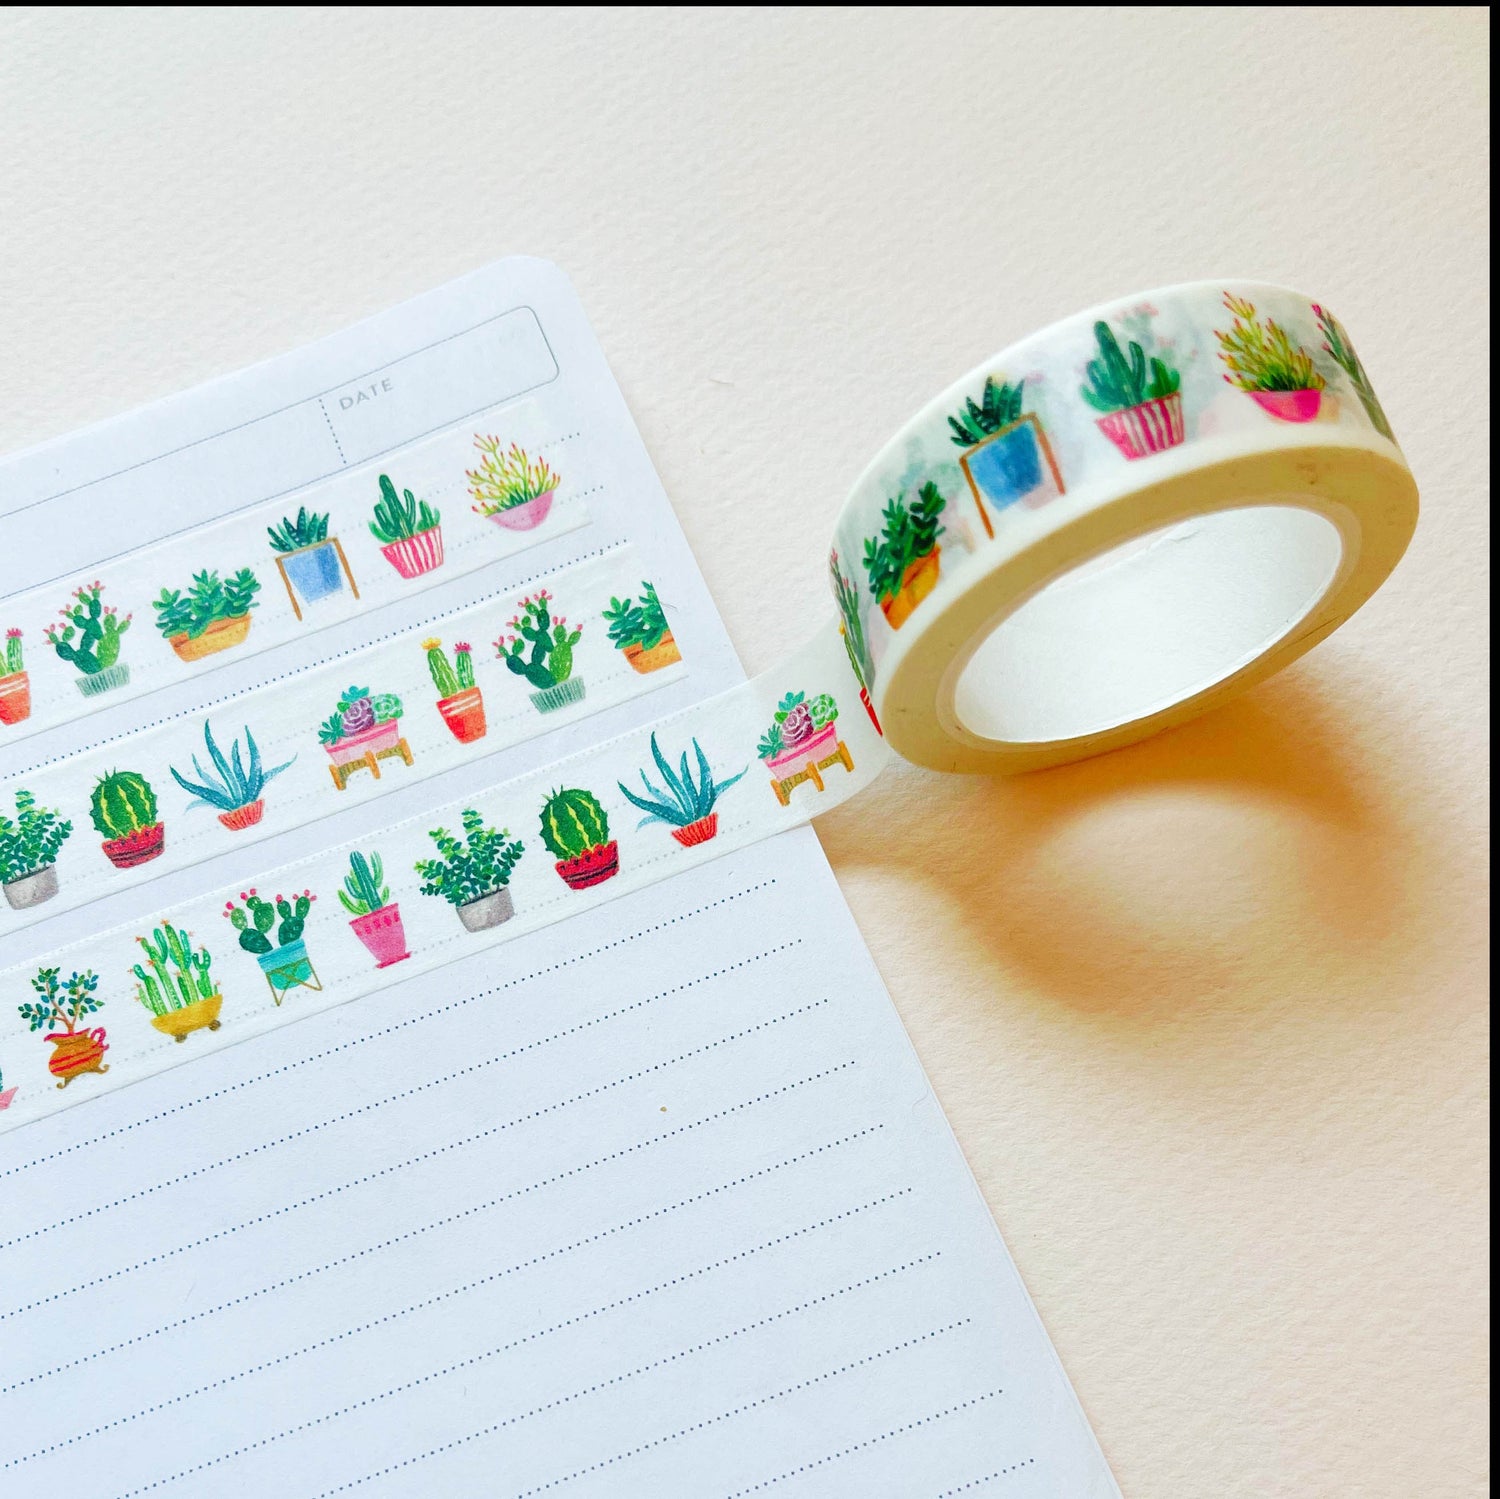 Cactus and succulent washi tape on notebook